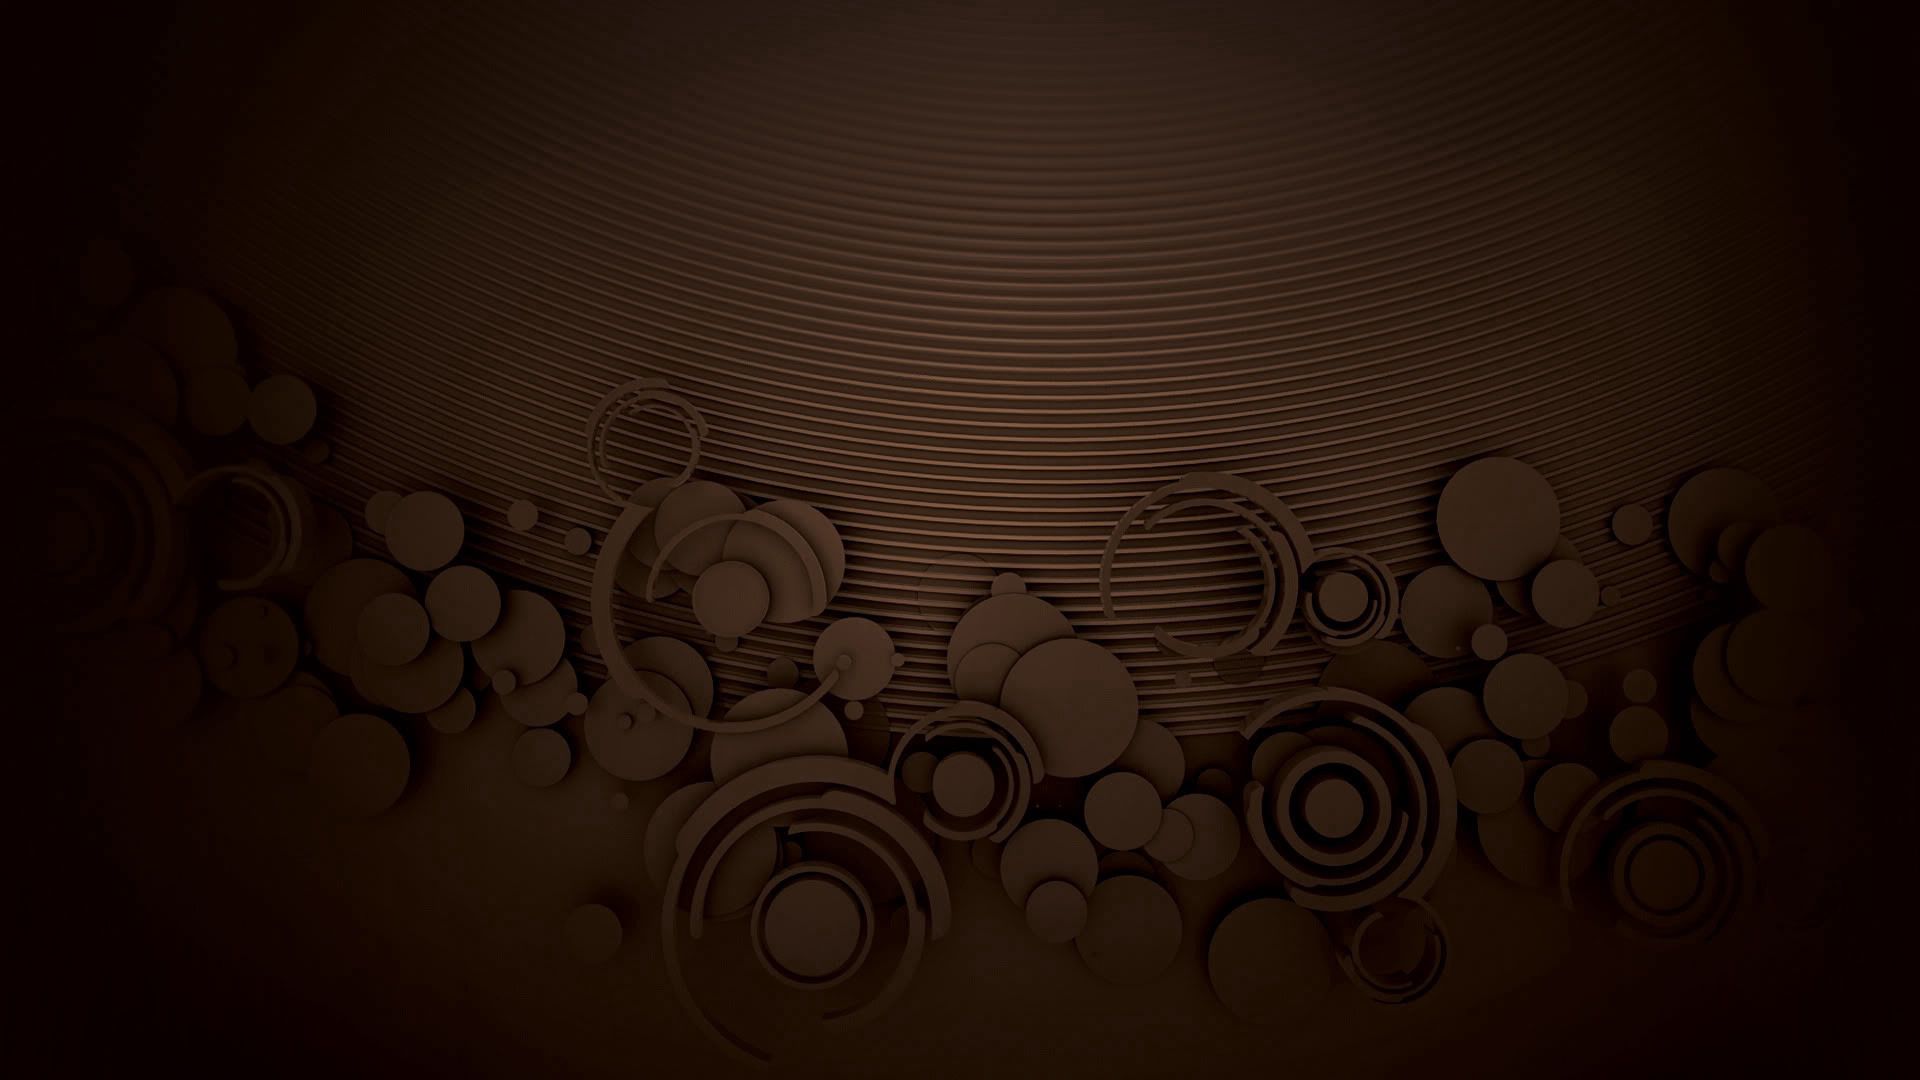 New Lock Screen Wallpapers chocolate, abstract, background, circles, pattern